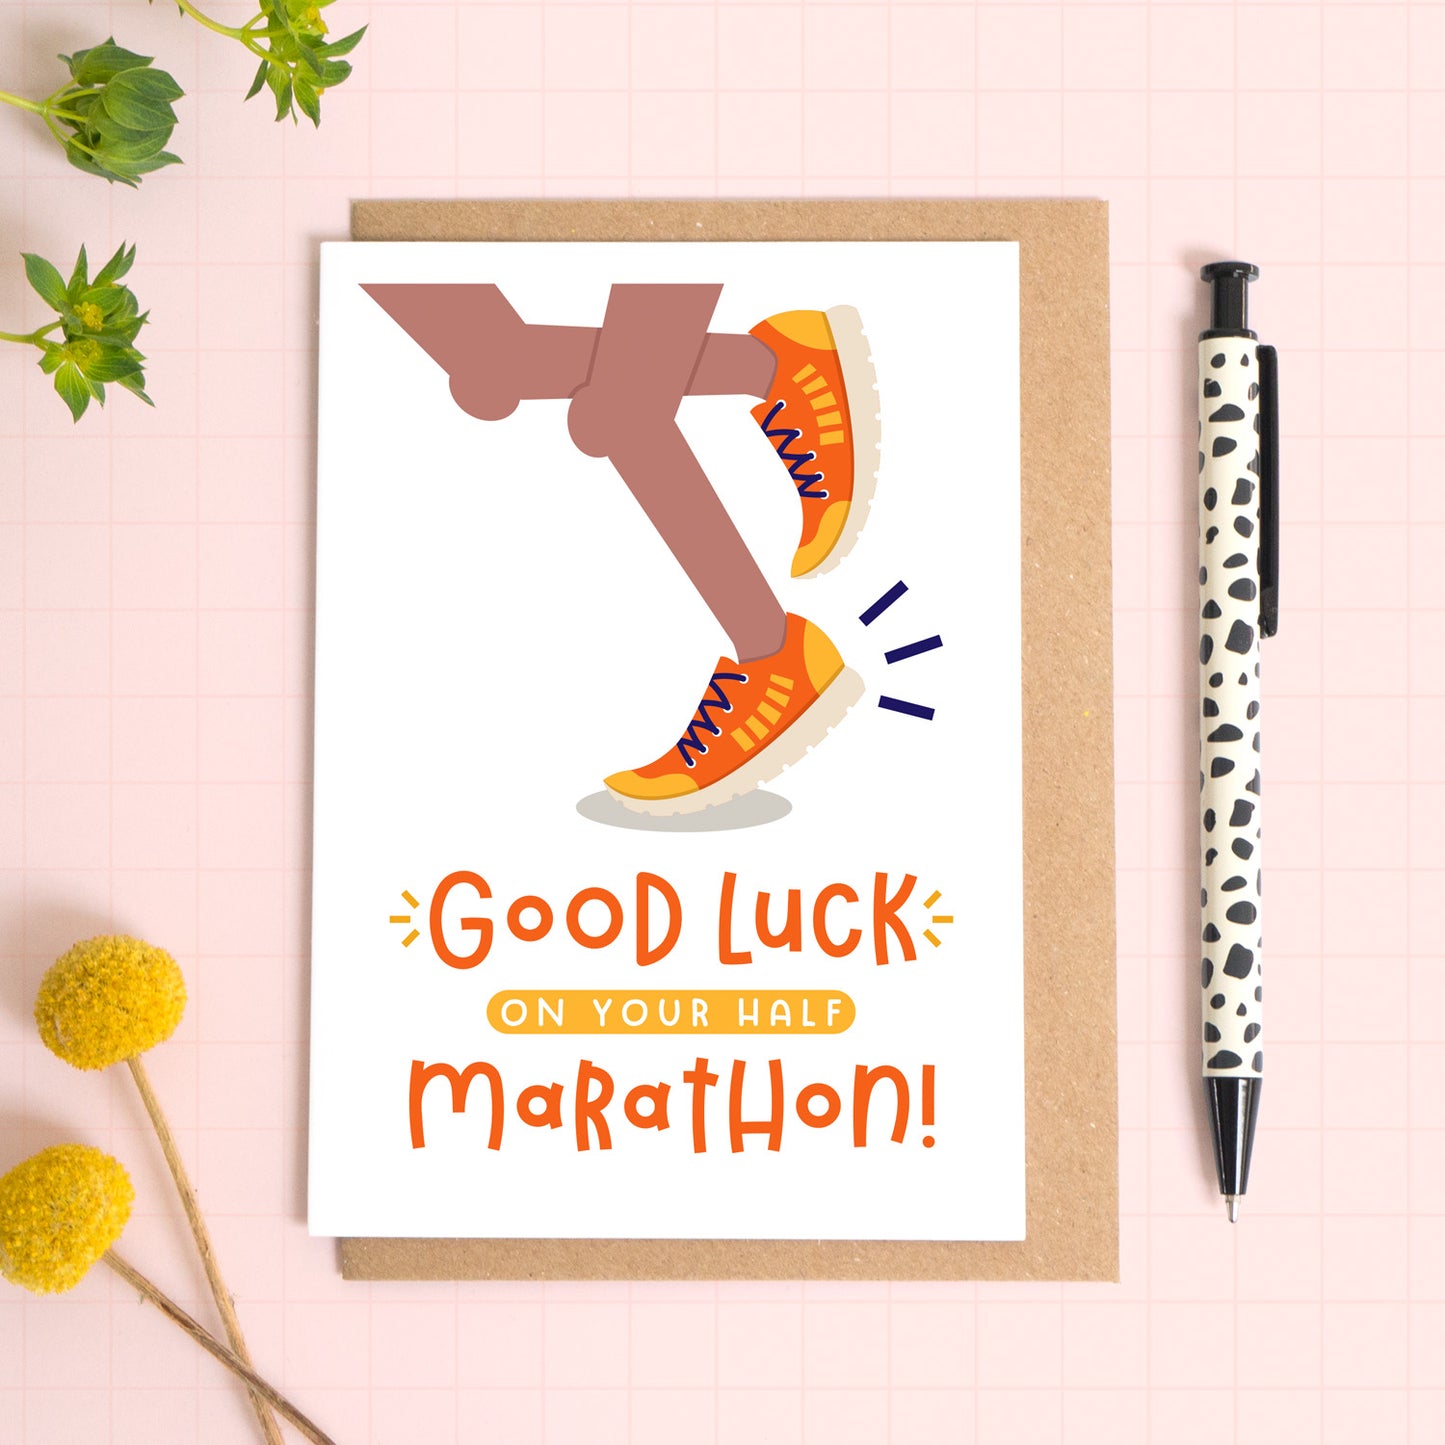 A half marathon good luck card photographed on top of a kraft brown envelope set on a pink background surrounded by foliage and a pen for scale. The card reads 'good luck on your half marathon' and features a pair of brown legs.